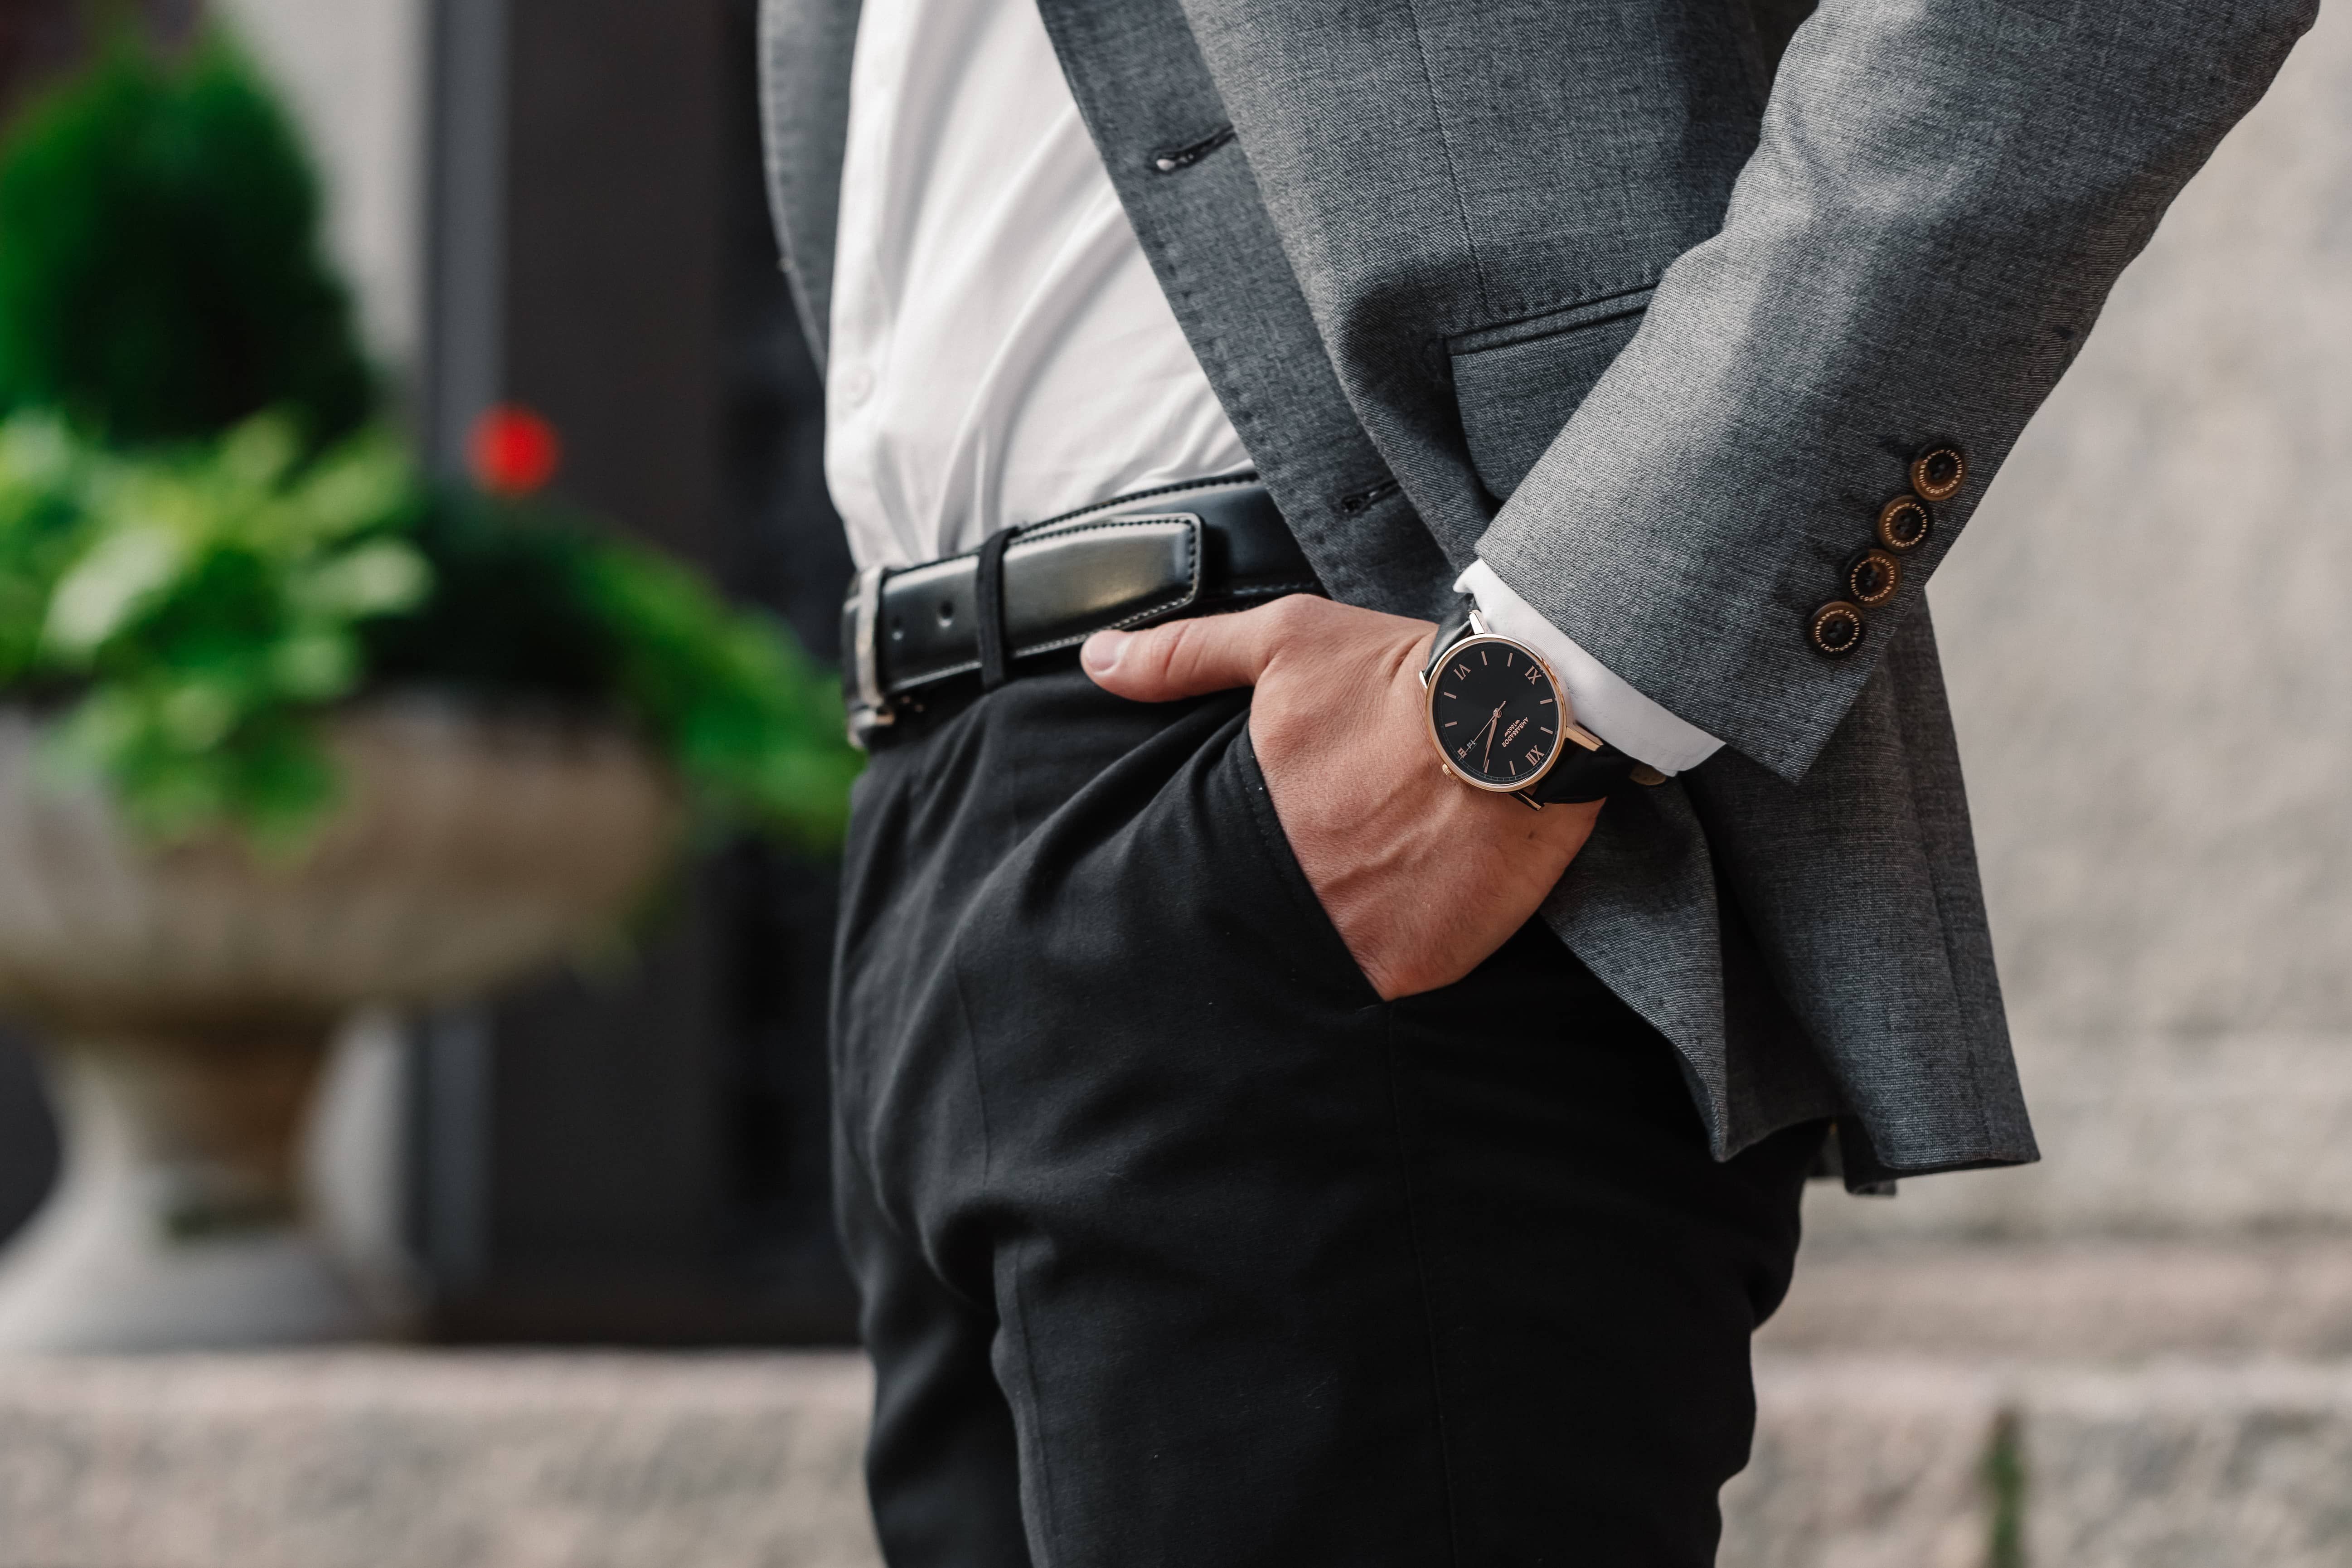 Smart Watch vs. Classic Watch - Which One's For You?